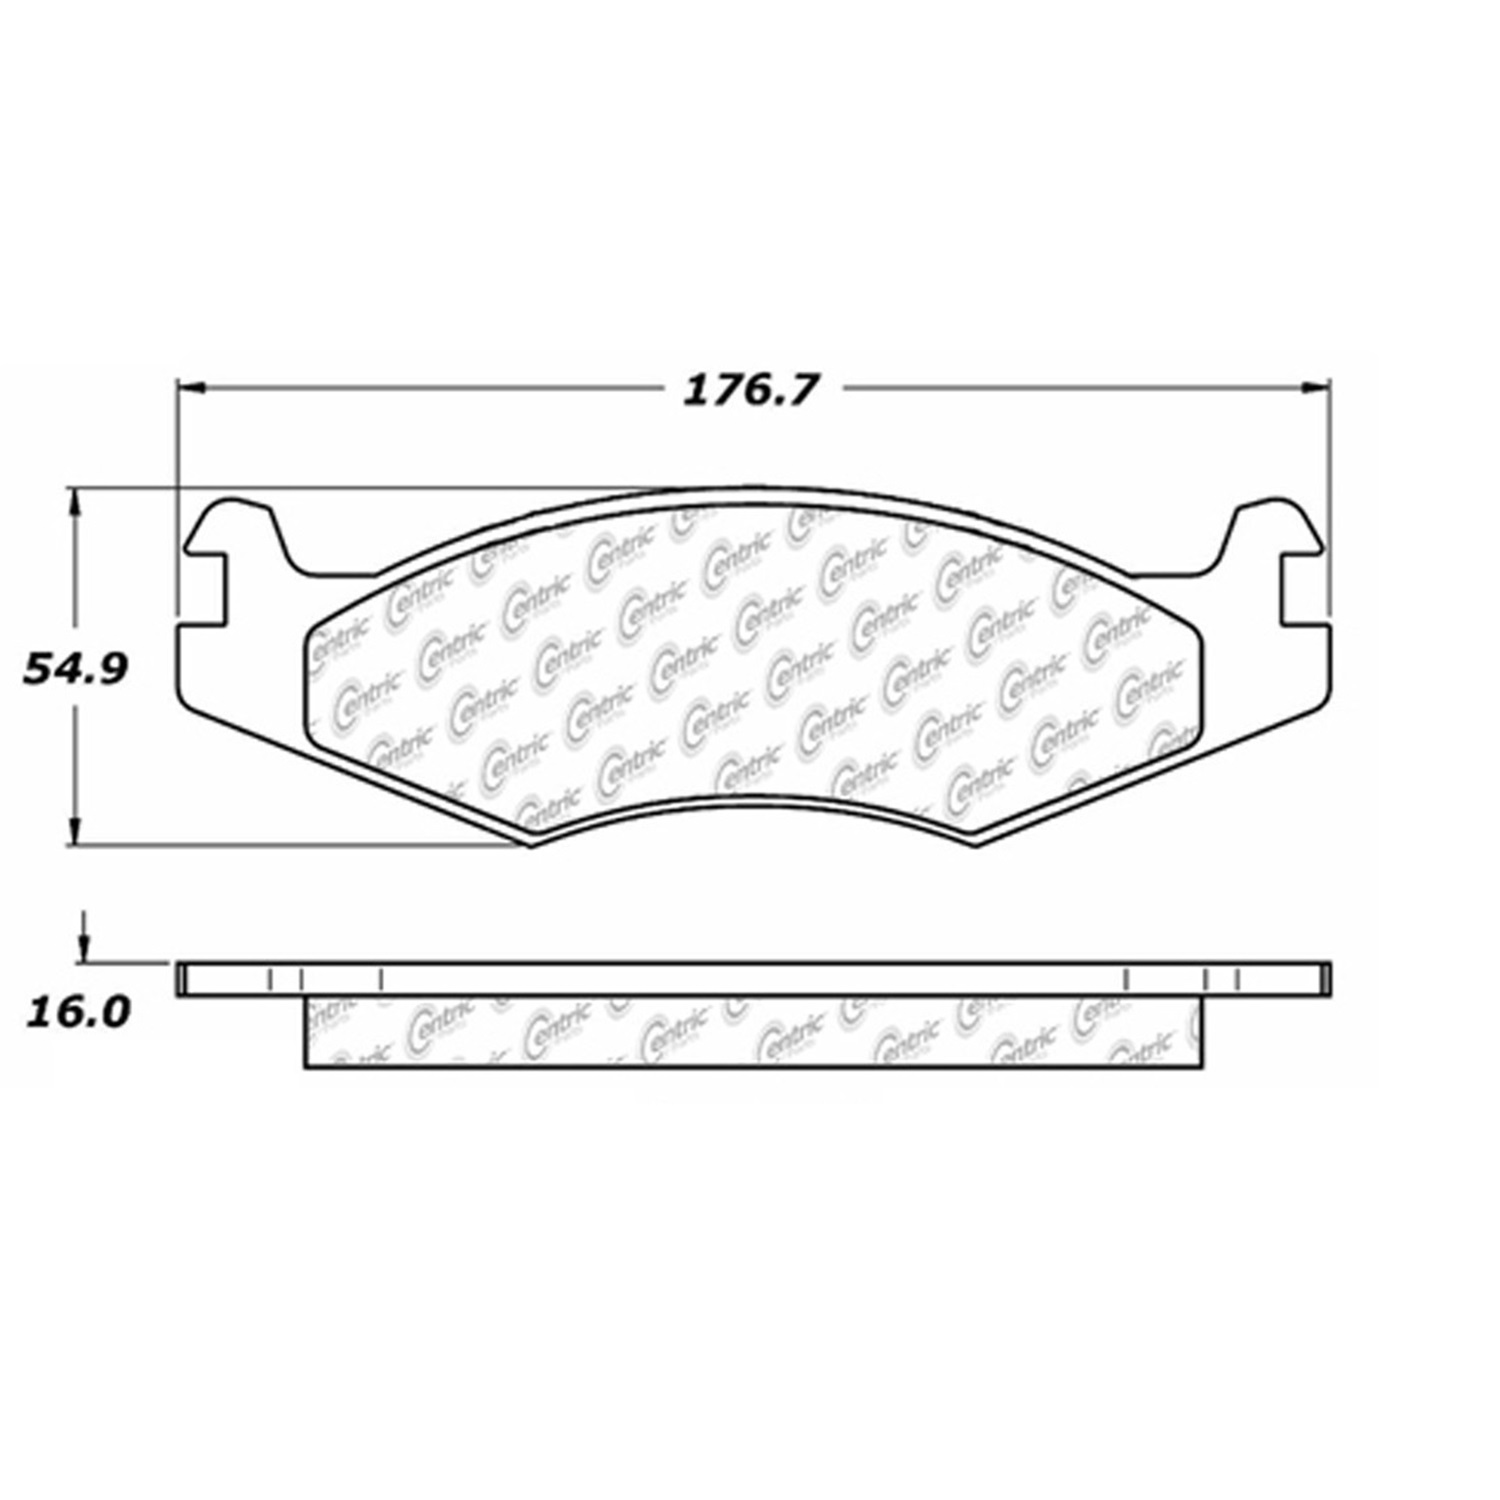 StopTech StopTech 106.06510 Disc Brake Pad Fits 92-02 H1 Hummer